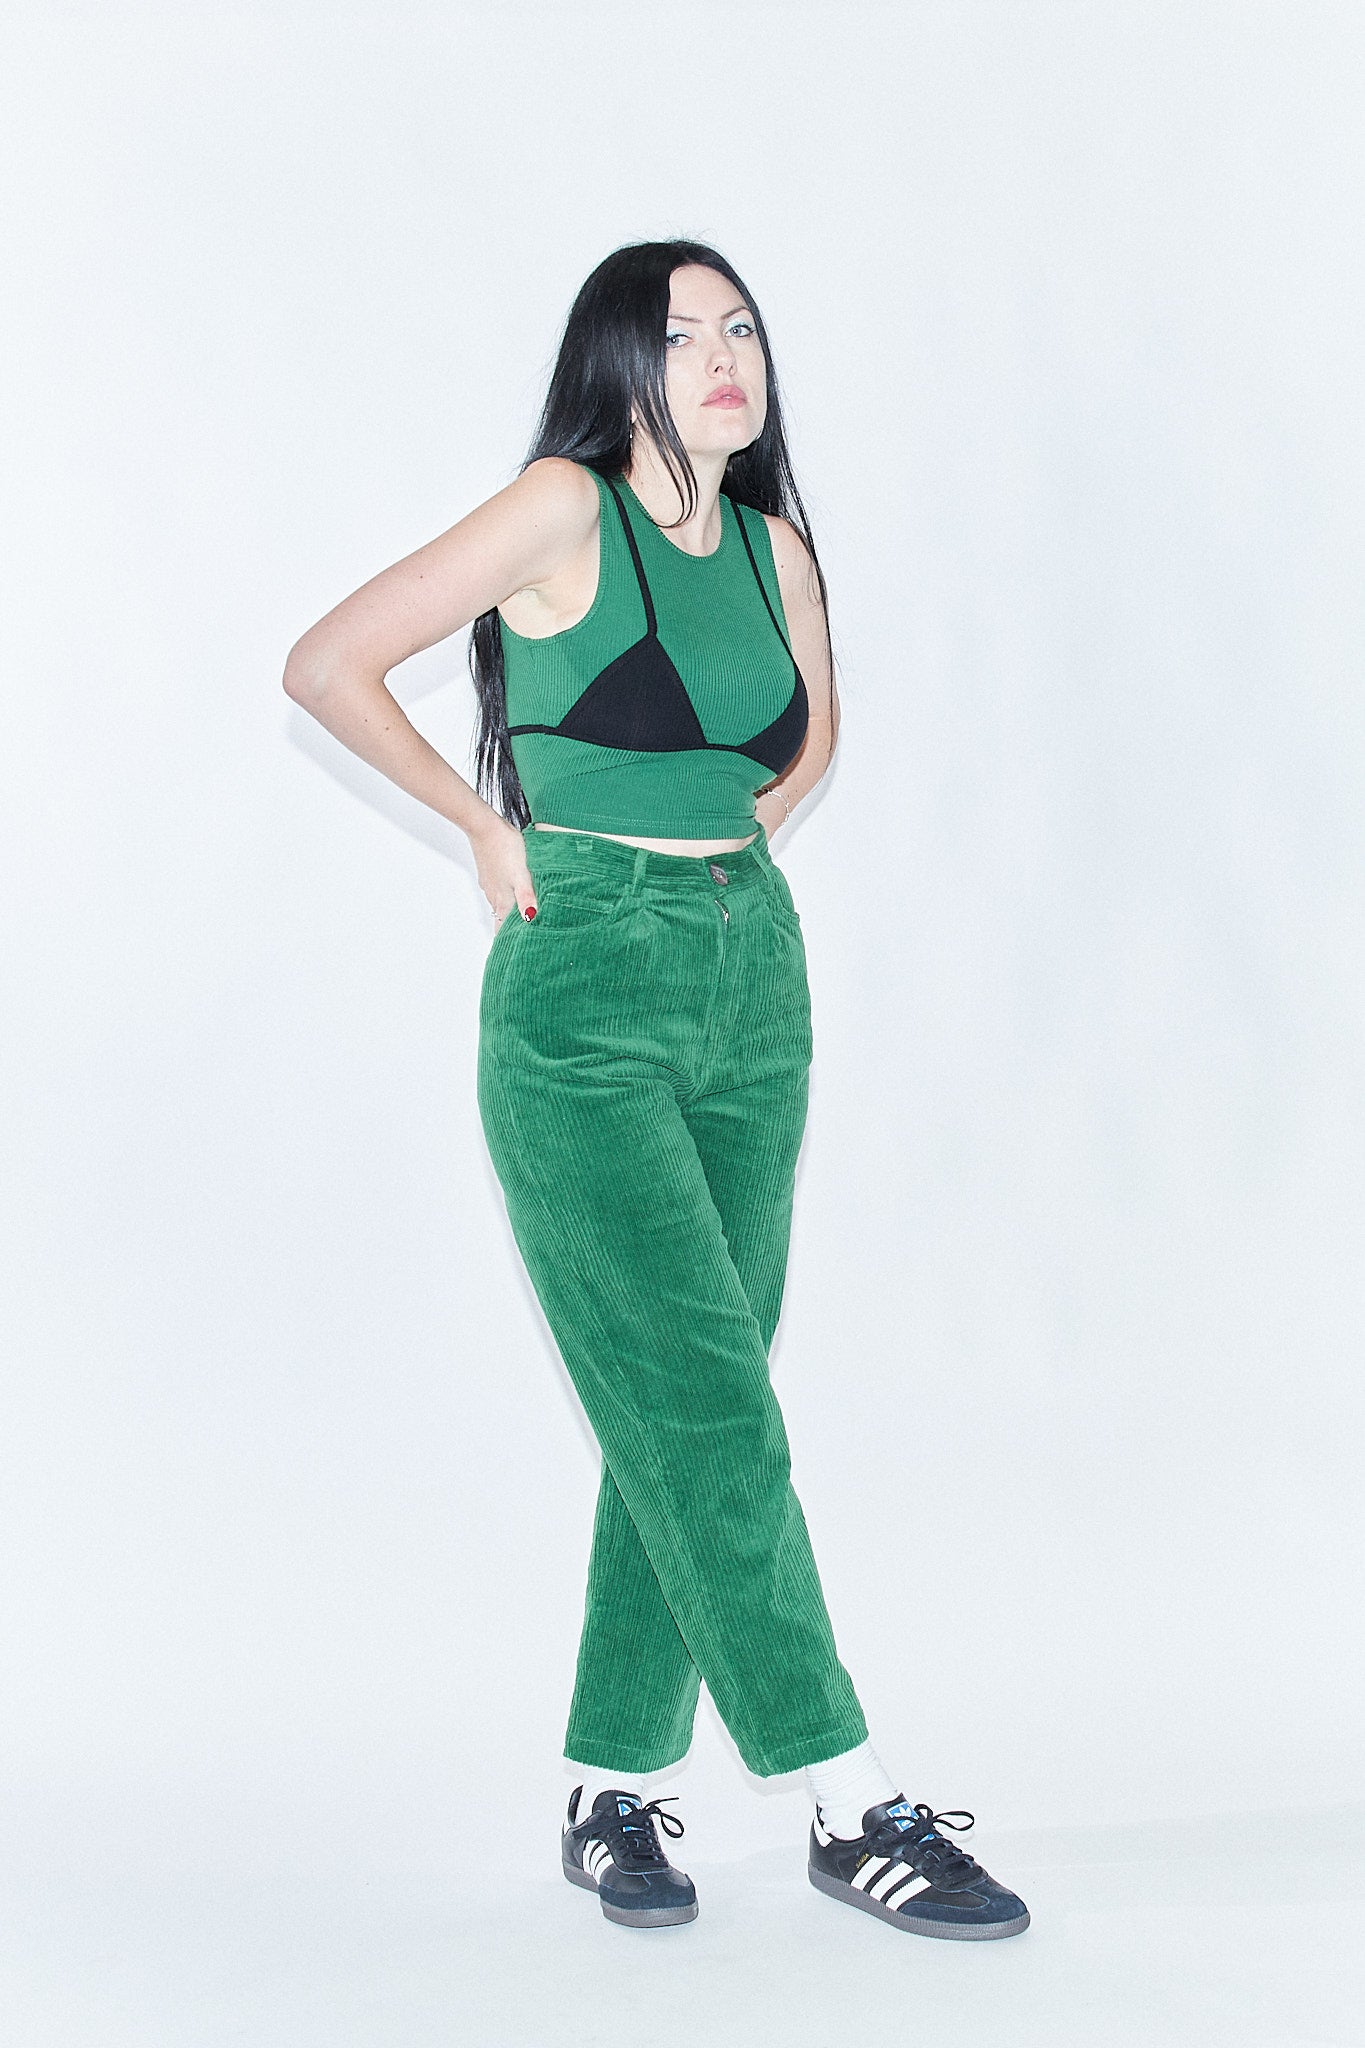 Olive Green Corduroy Trousers : Made To Measure Custom Jeans For Men & Women,  MakeYourOwnJeans®